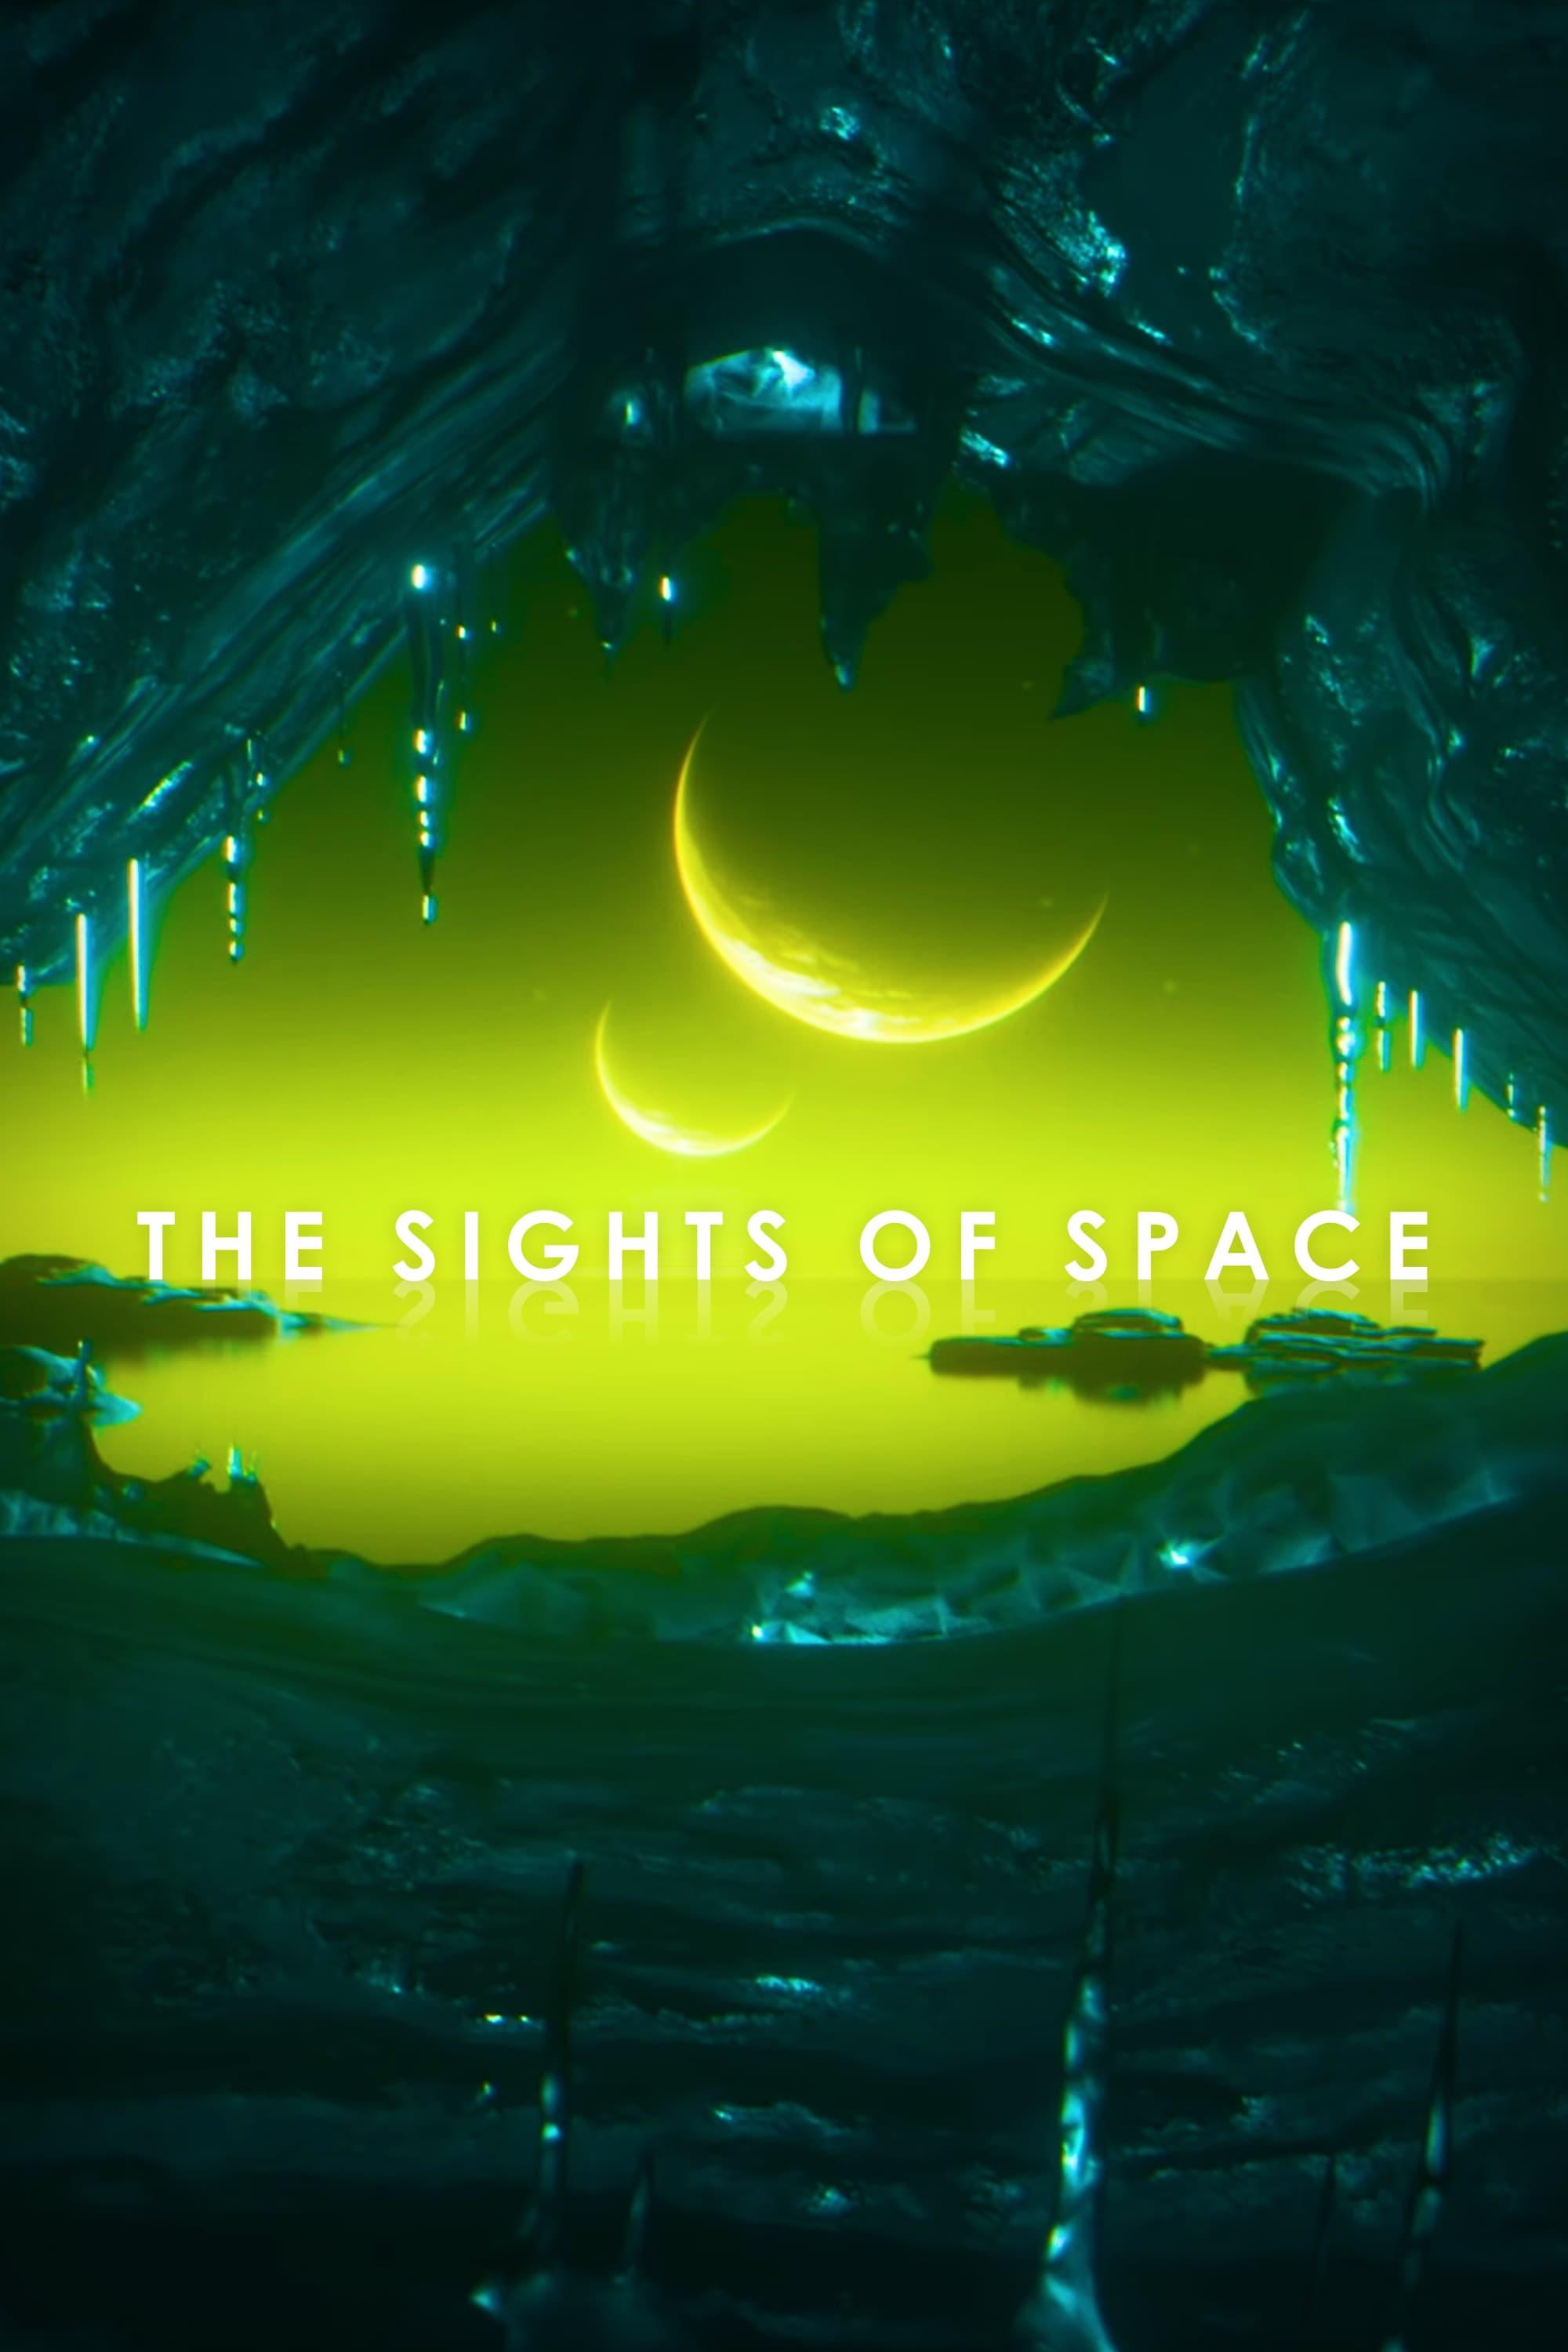 The Sights of Space - A Voyage to Spectacular Alien Worlds poster